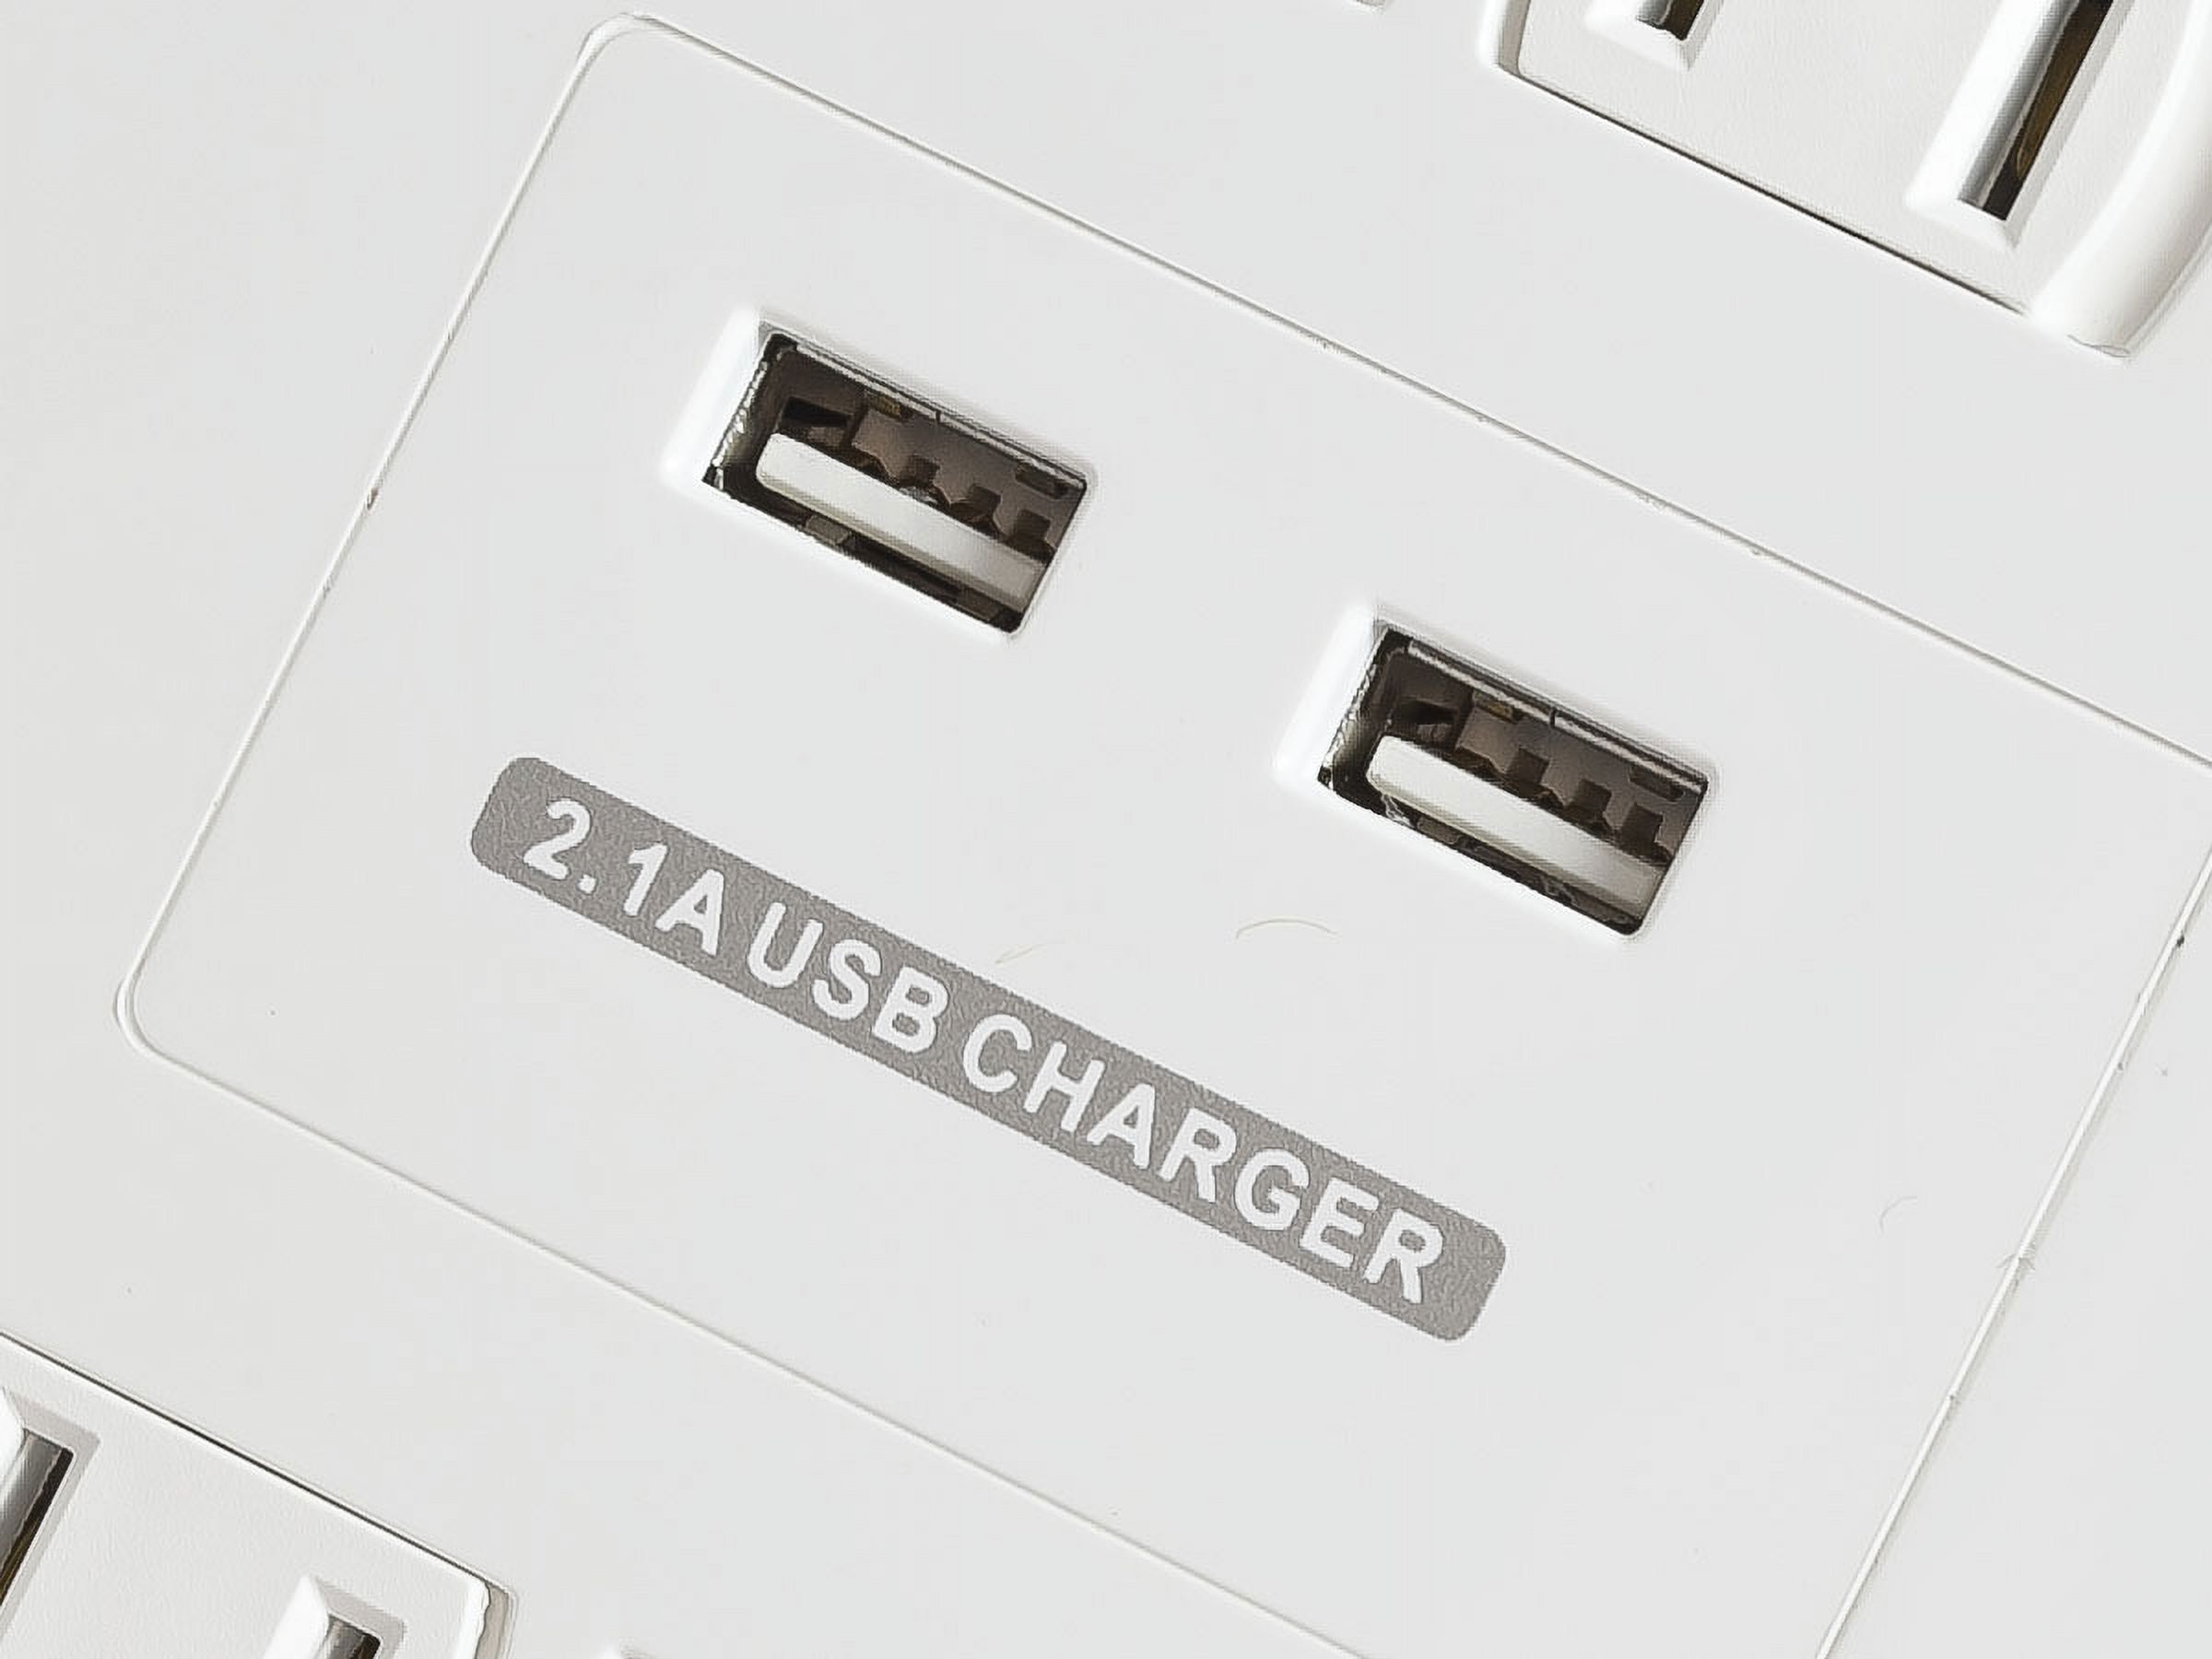 Monoprice 12 Outlet Power Surge Protector w/ 2 Built-In USB Charger Ports, 4230 Joules - image 3 of 6